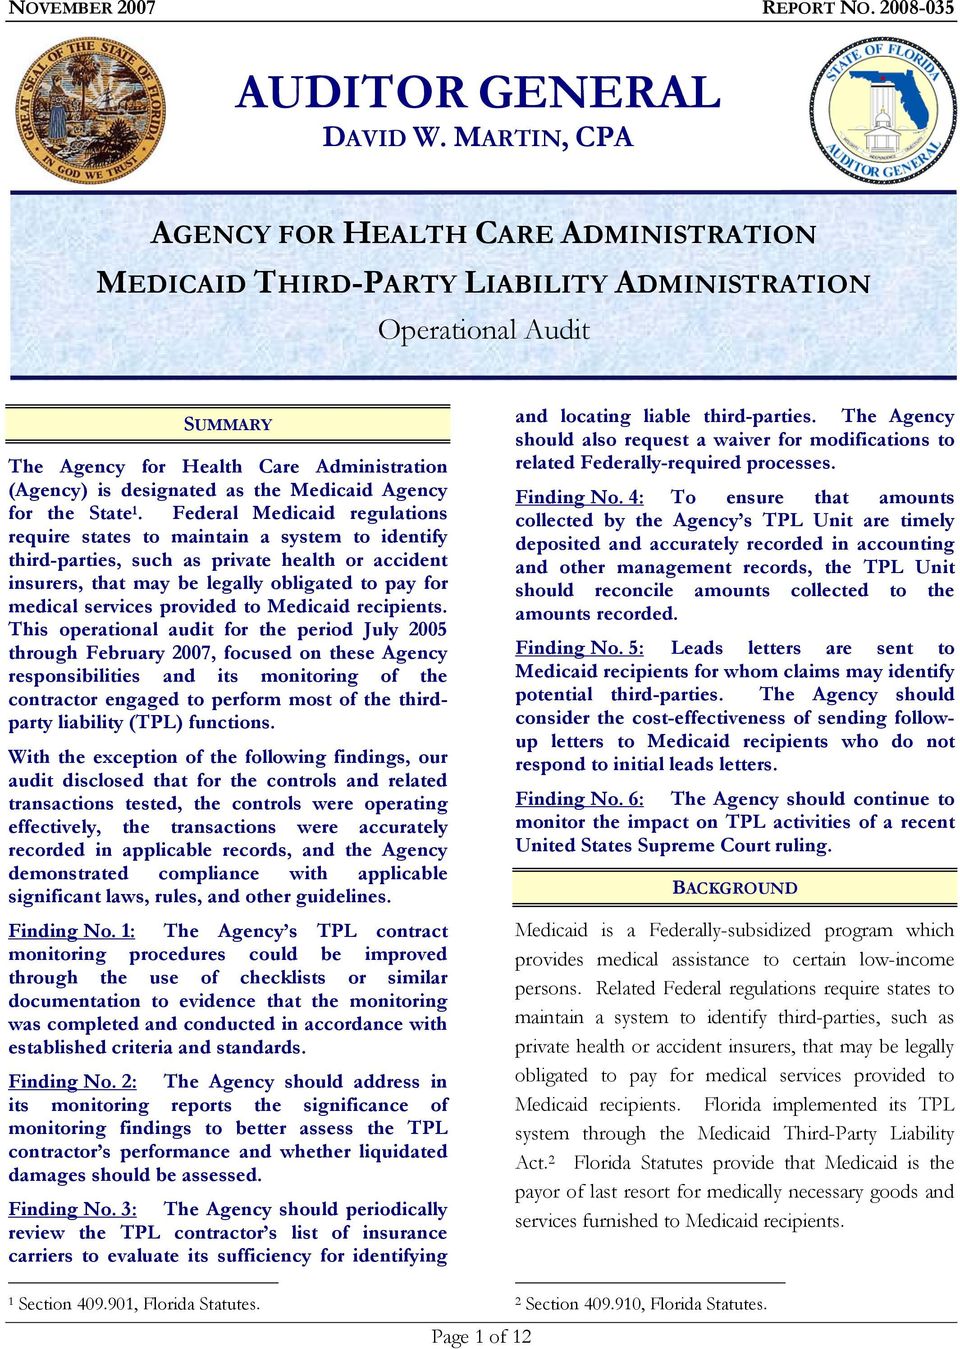 Medicaid Agency for the State 1.